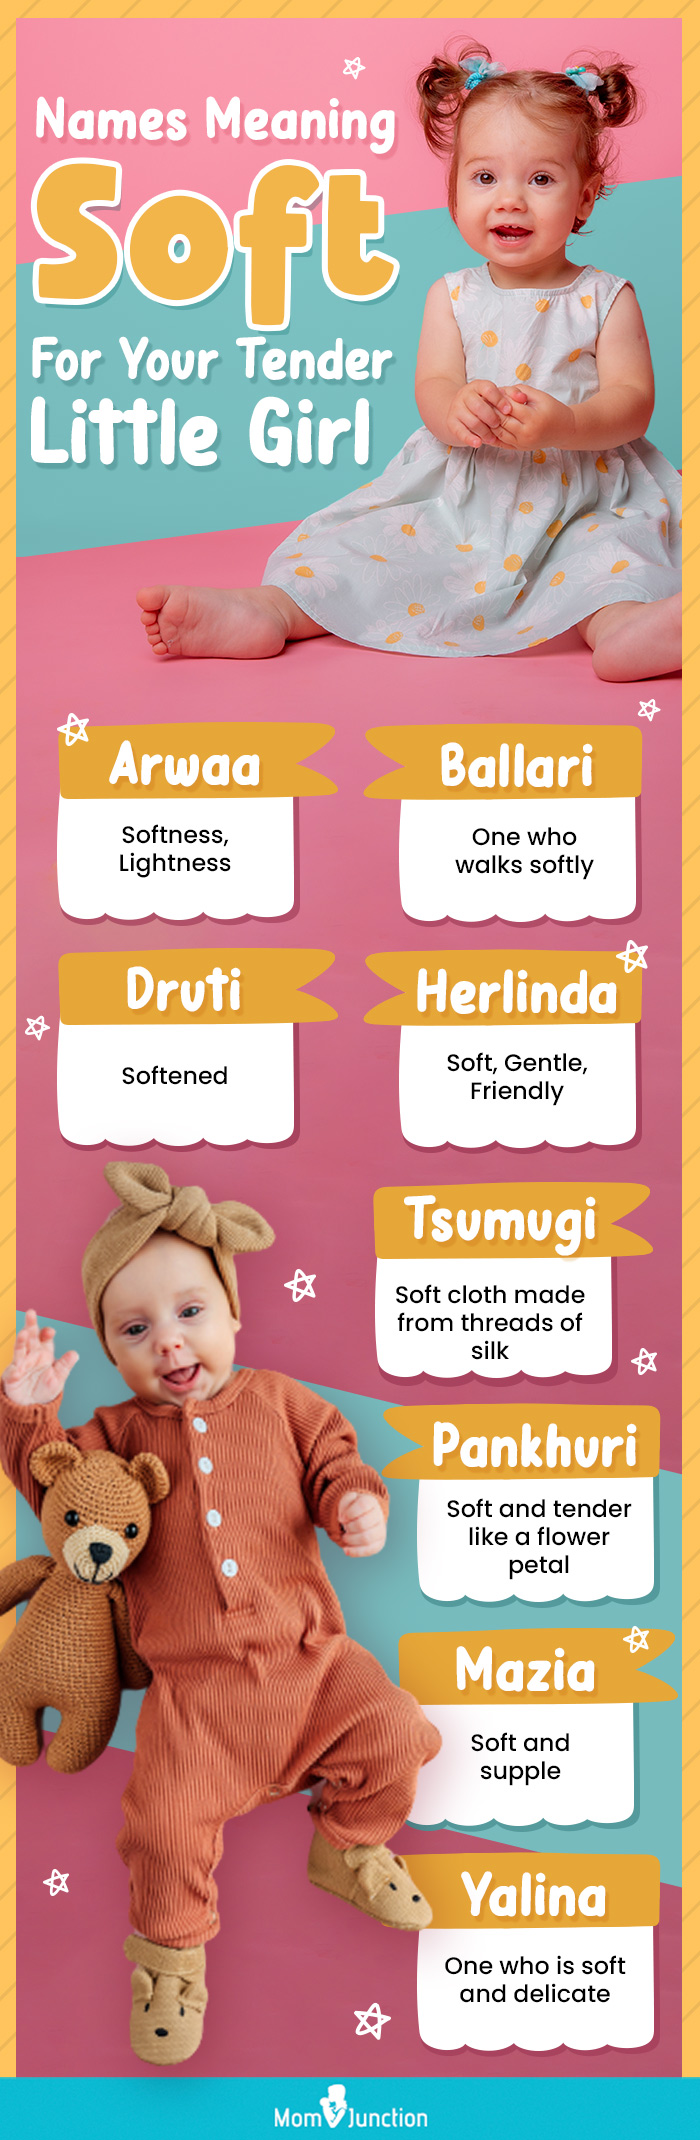 names meaning soft for your tender little girl (infographic)